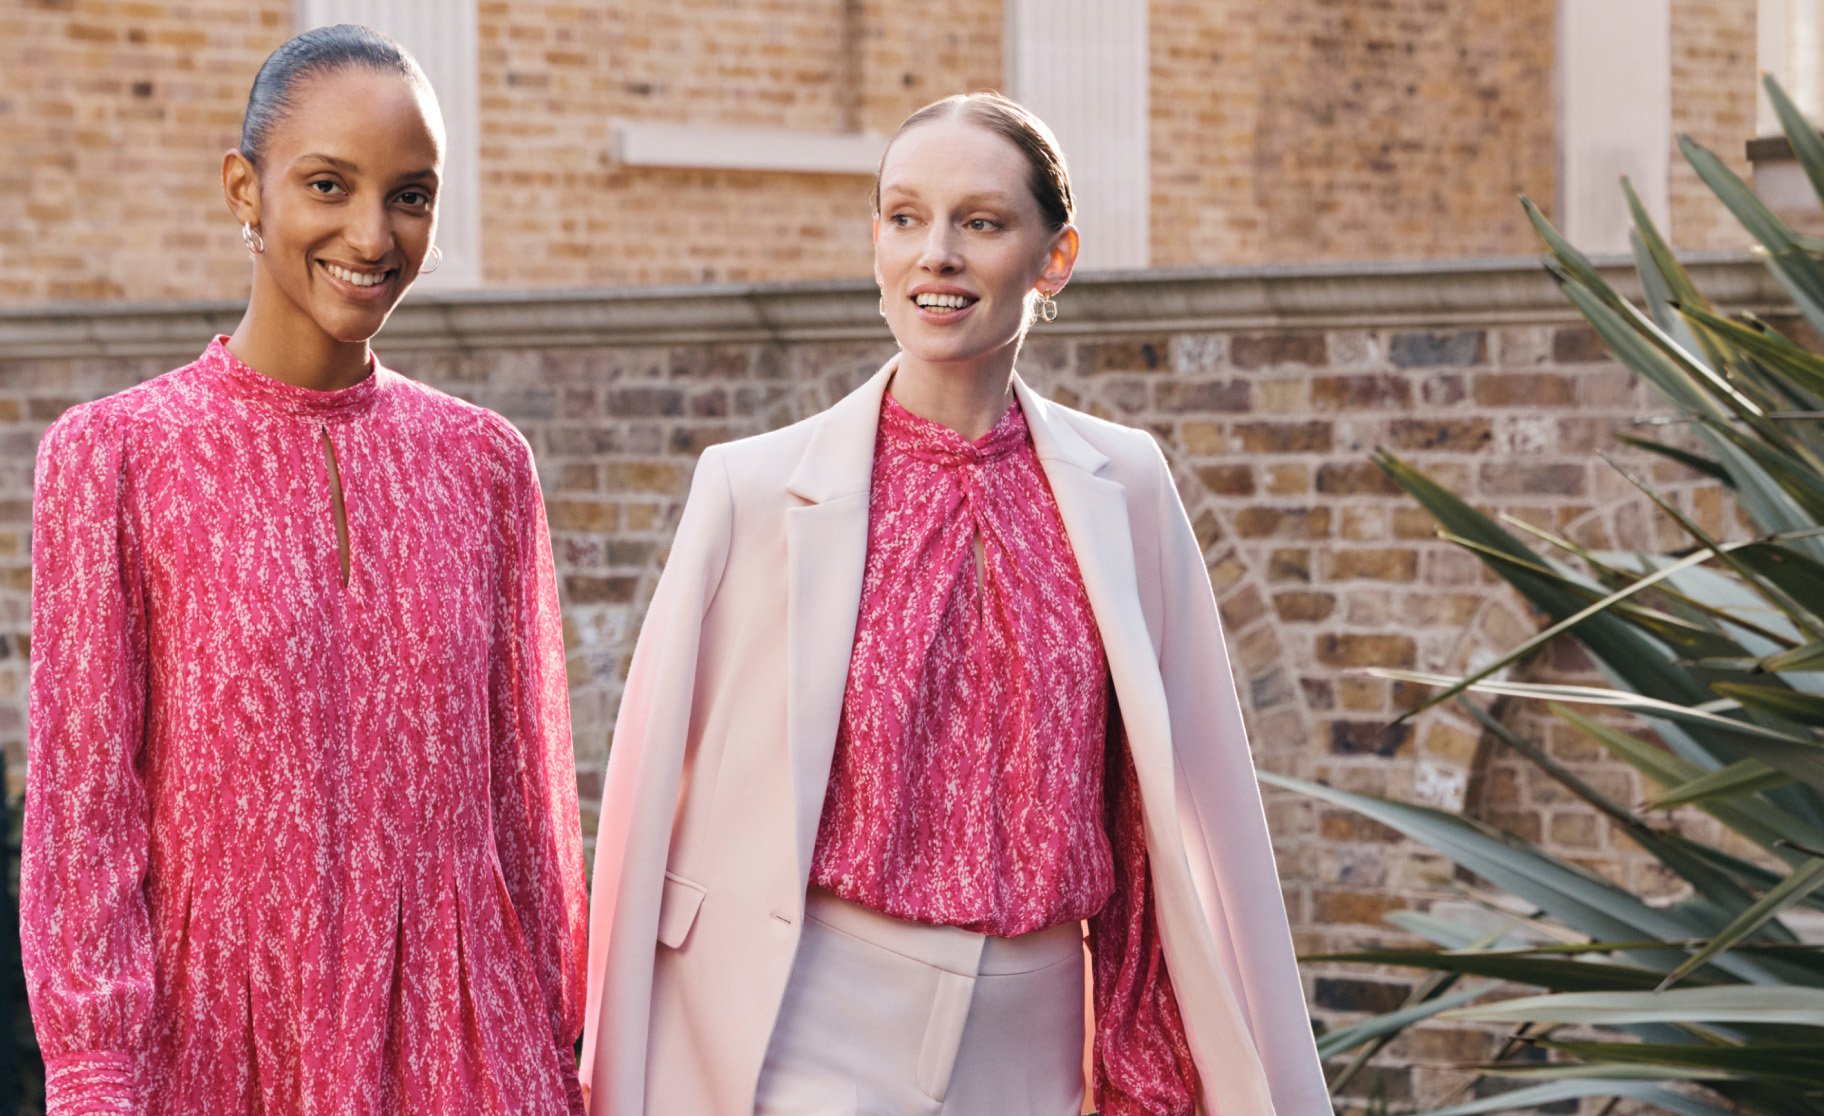 Image of two models arriving at a wedding reception wearing occasion outfits.